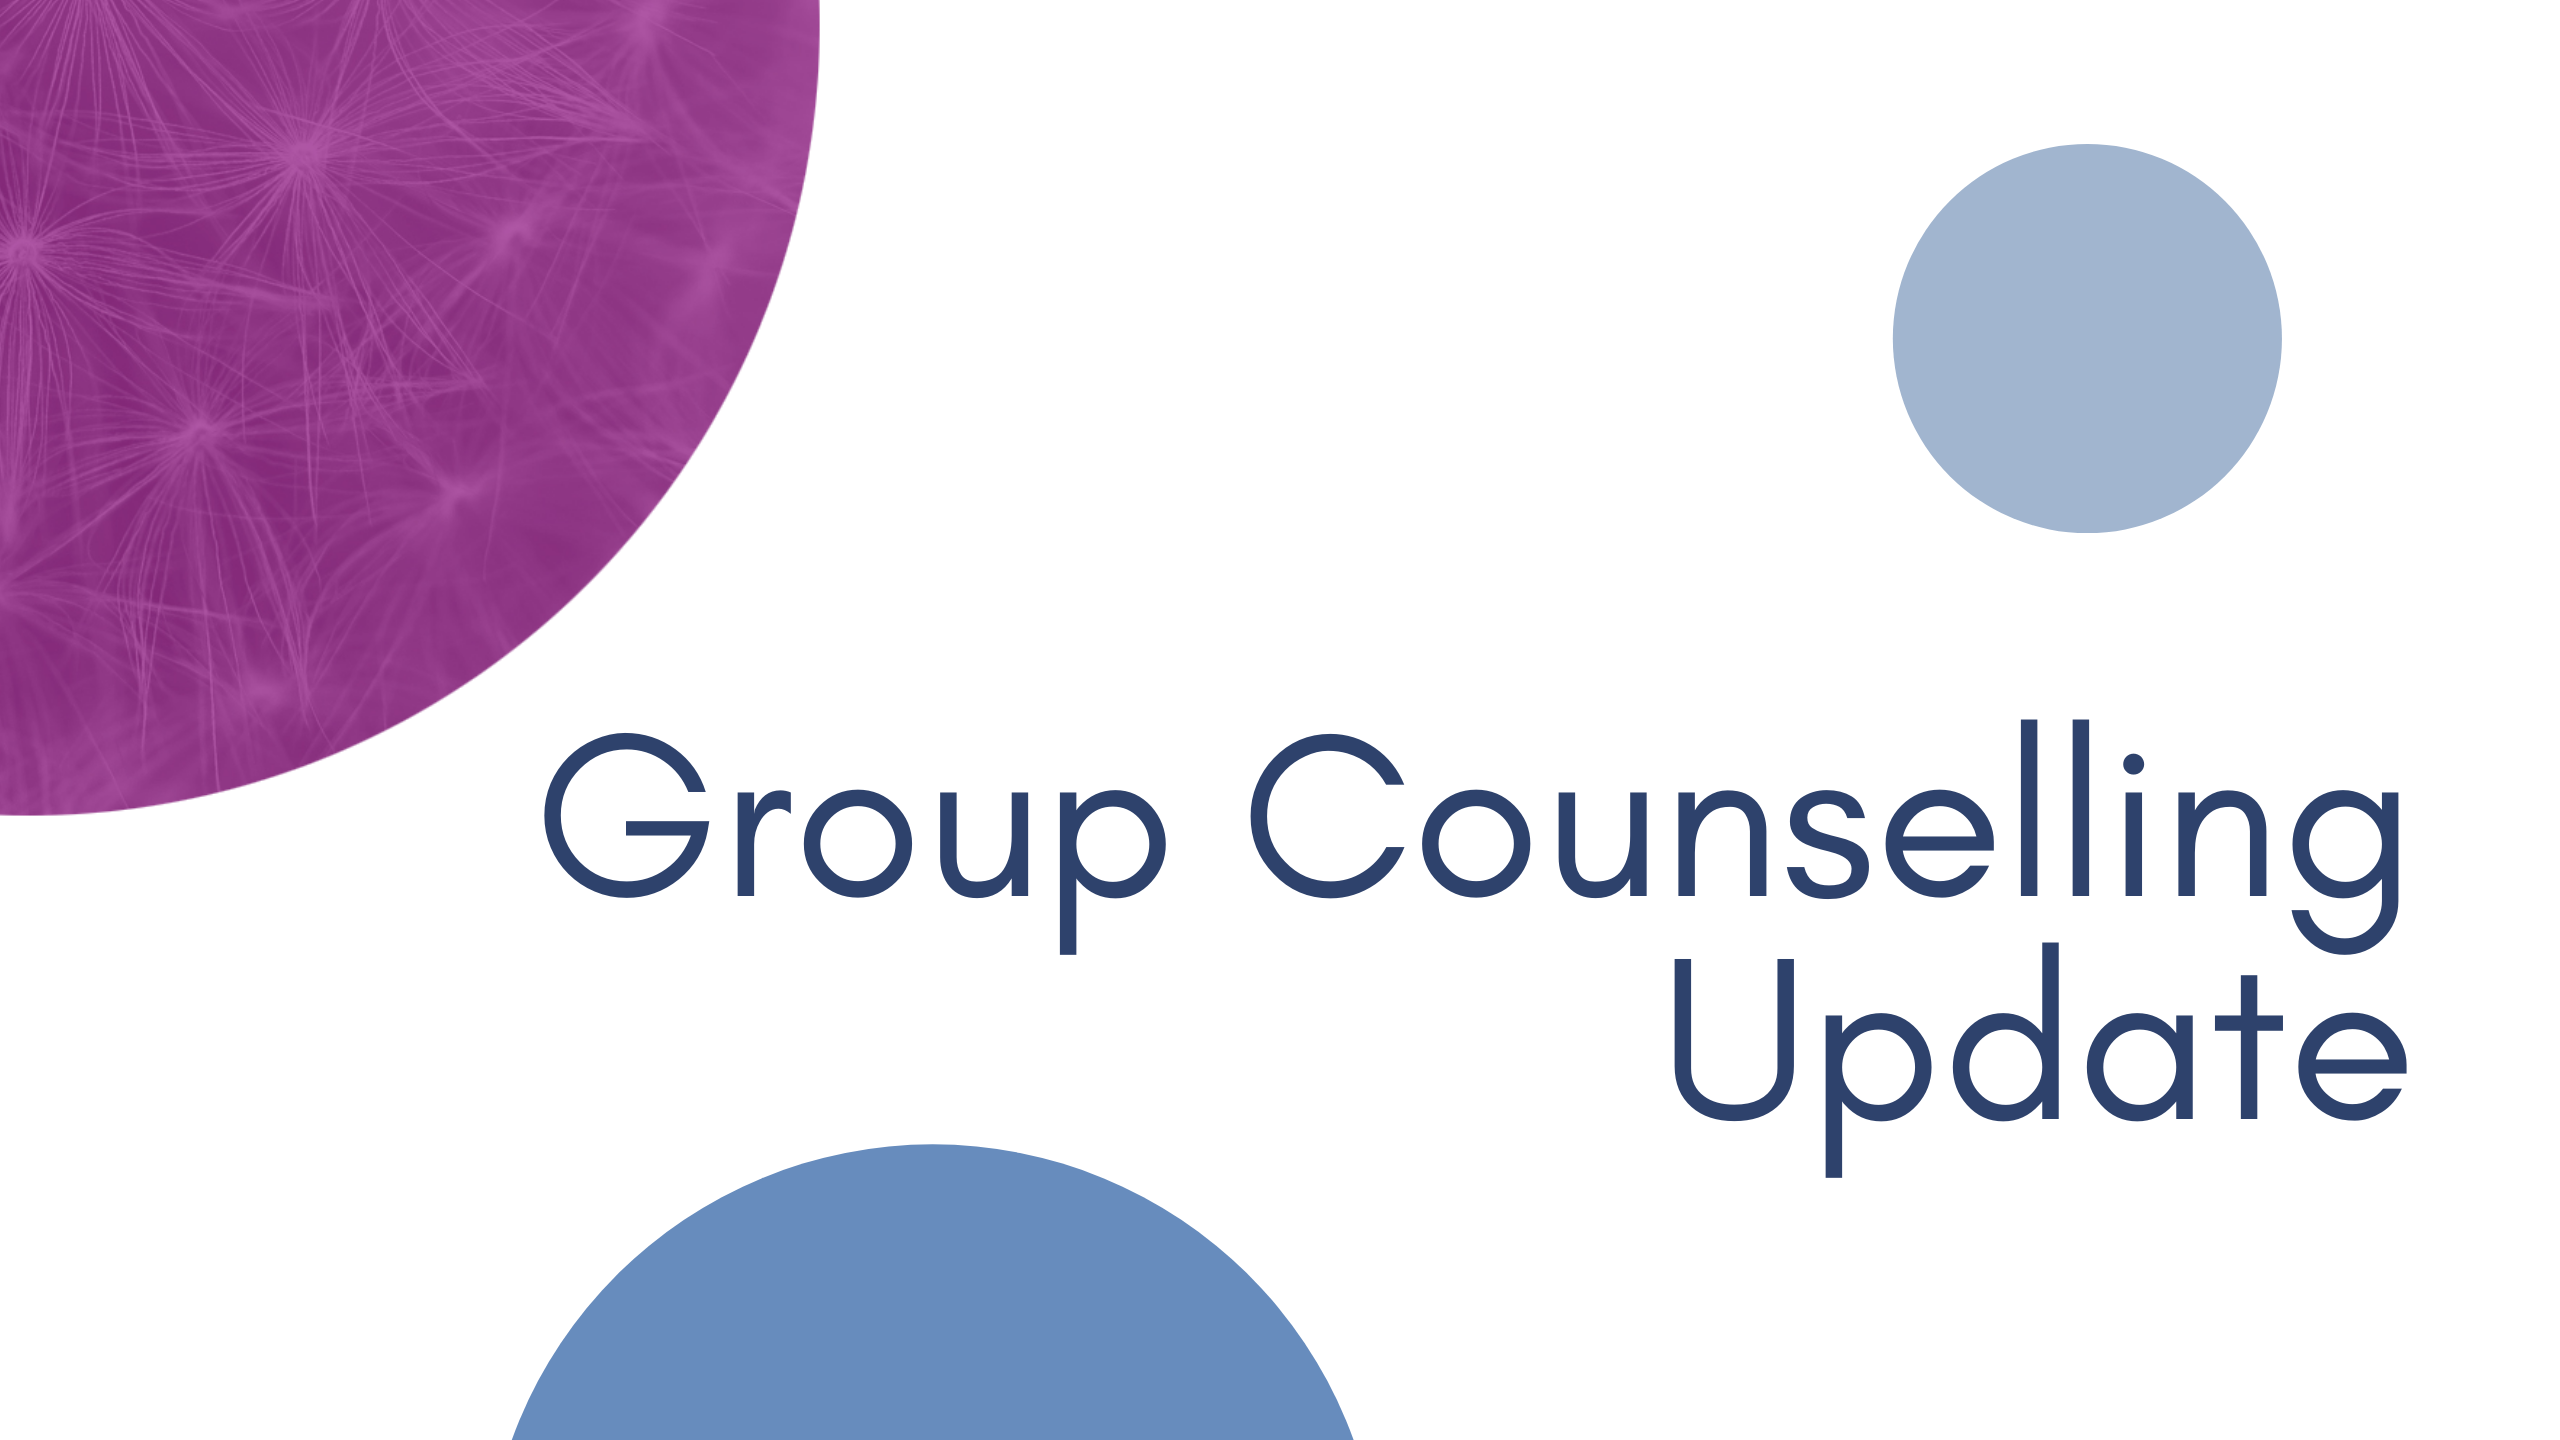 Header that says "Group Counselling Update." There are circles in purple and two shades of blue.